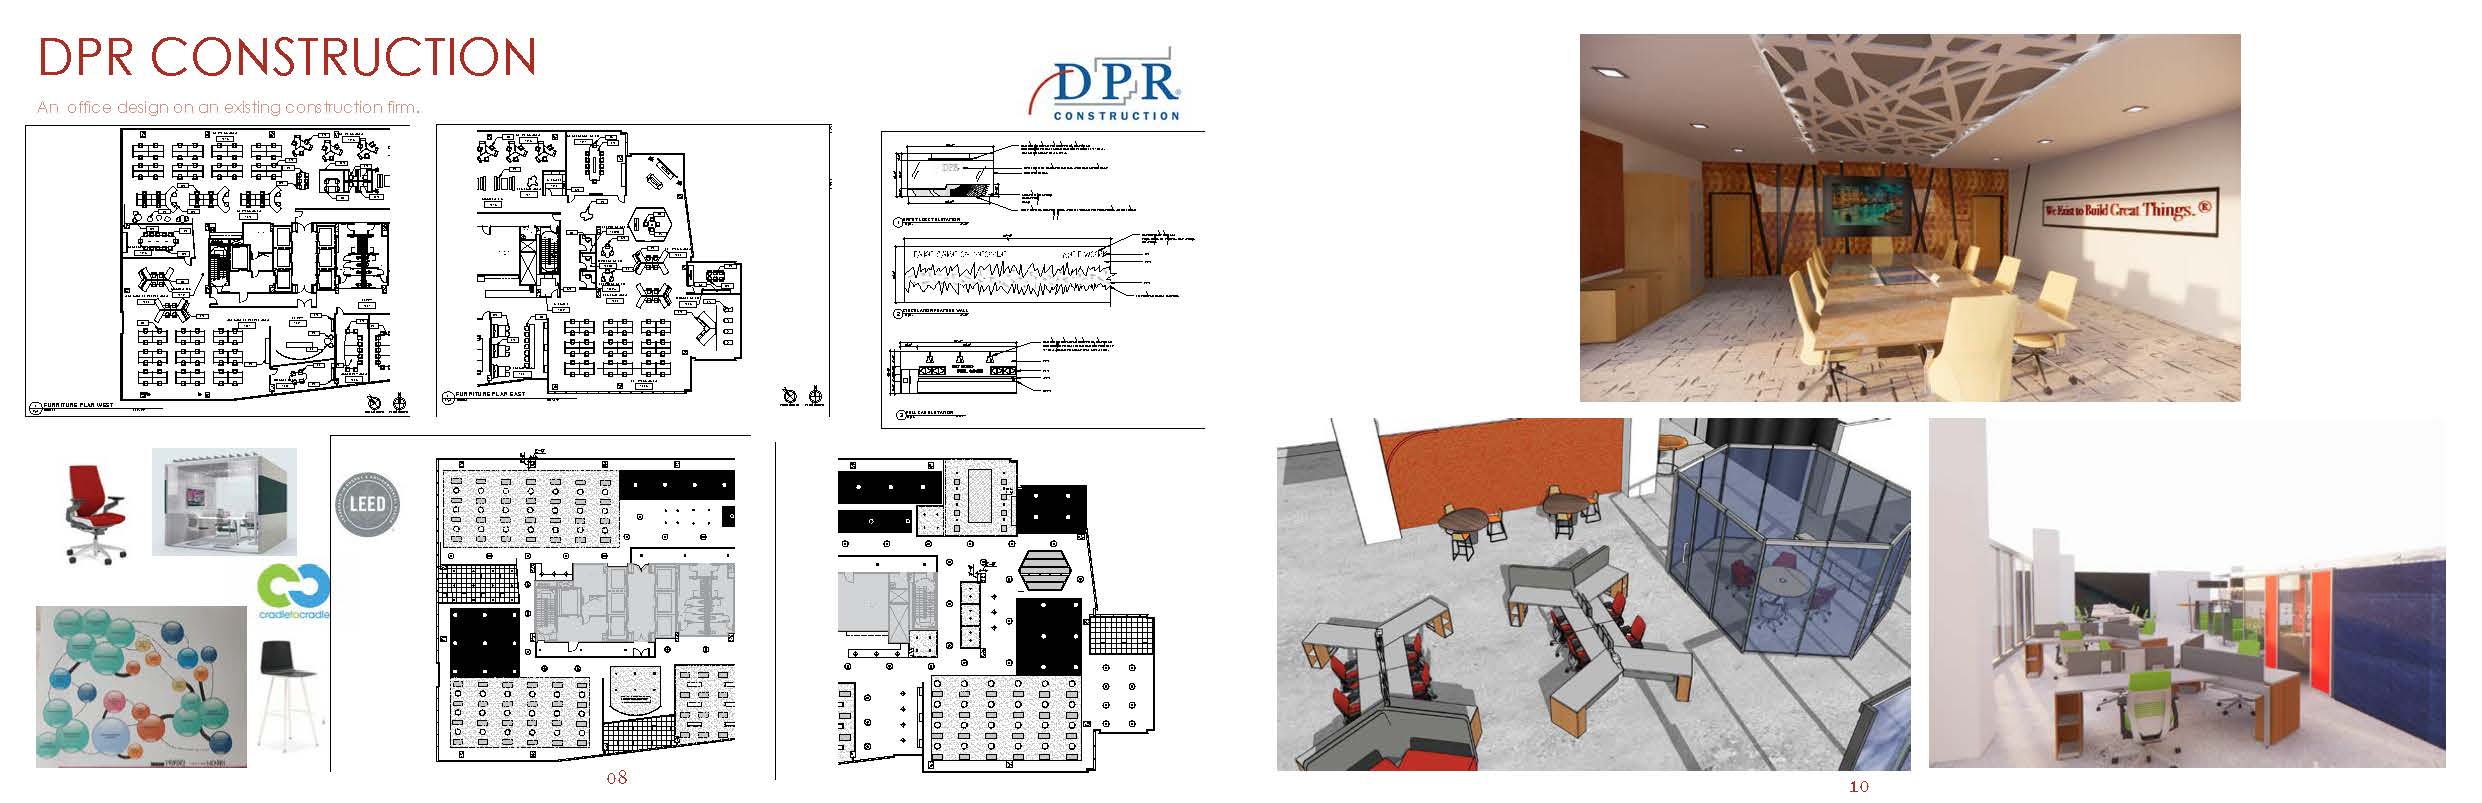 Office designs for DPR construction company